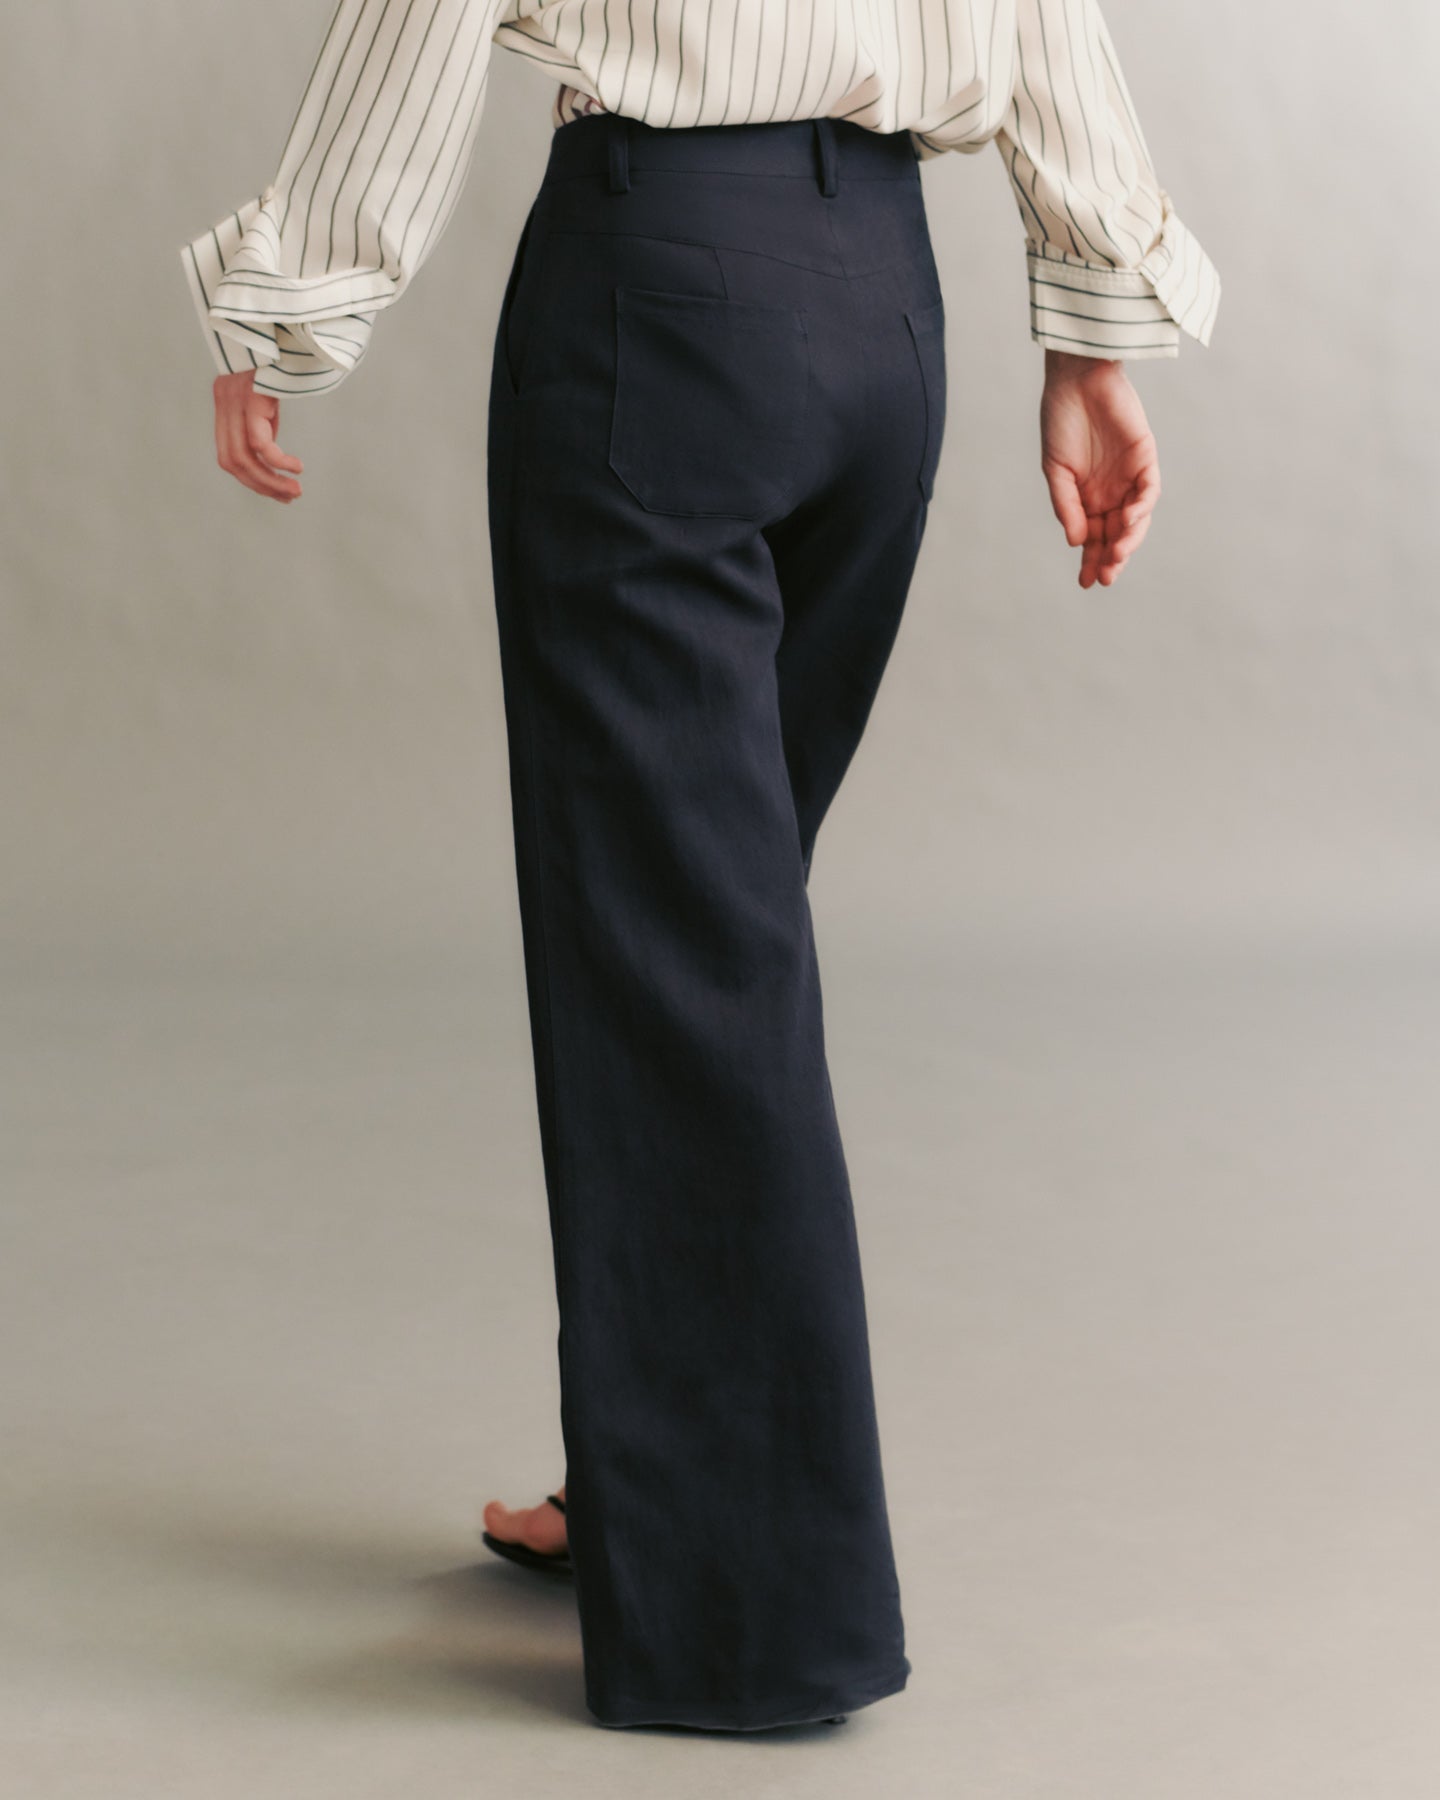 TWP Midnight Howard Pant in cotton linen view 2